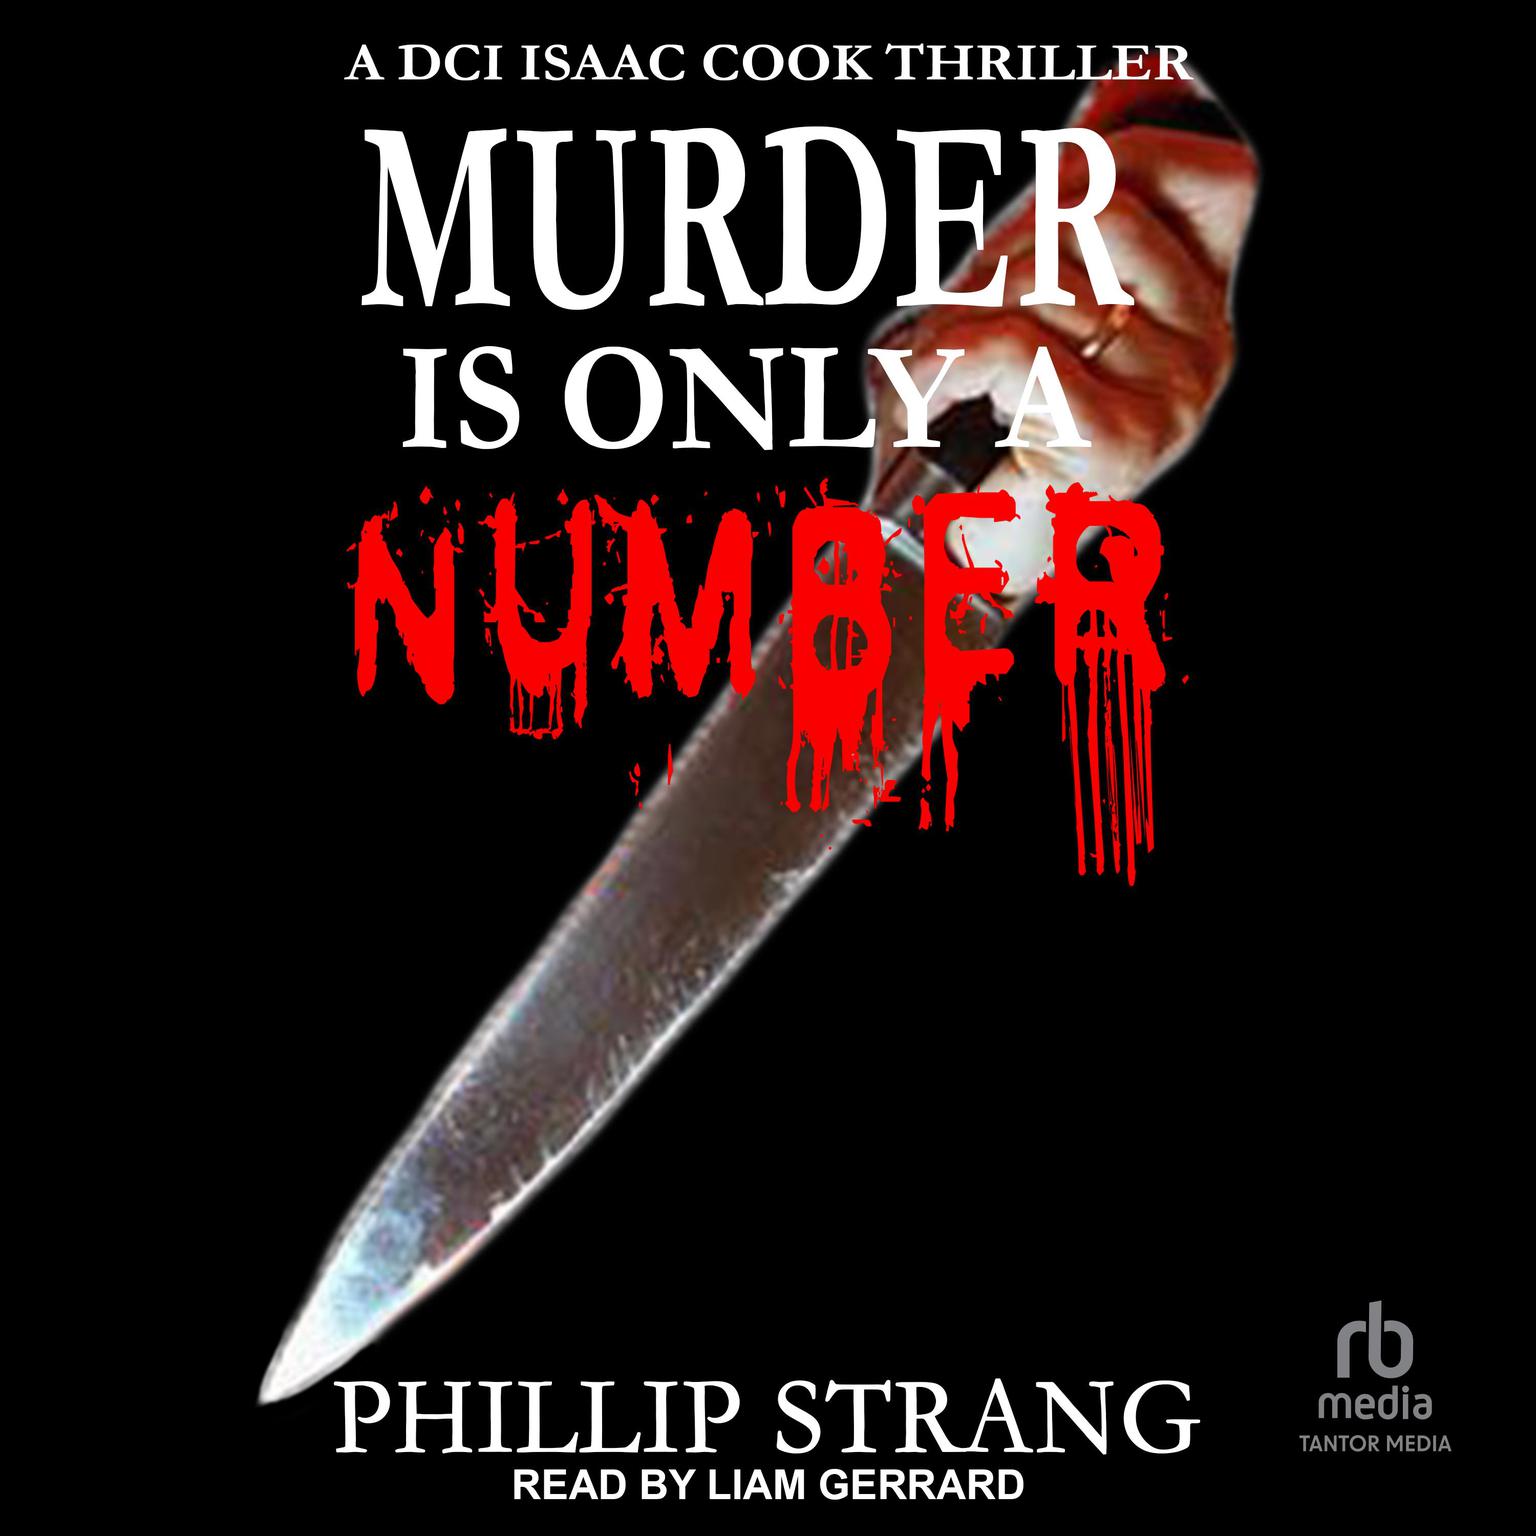 Murder is only a Number Audiobook, by Phillip Strang